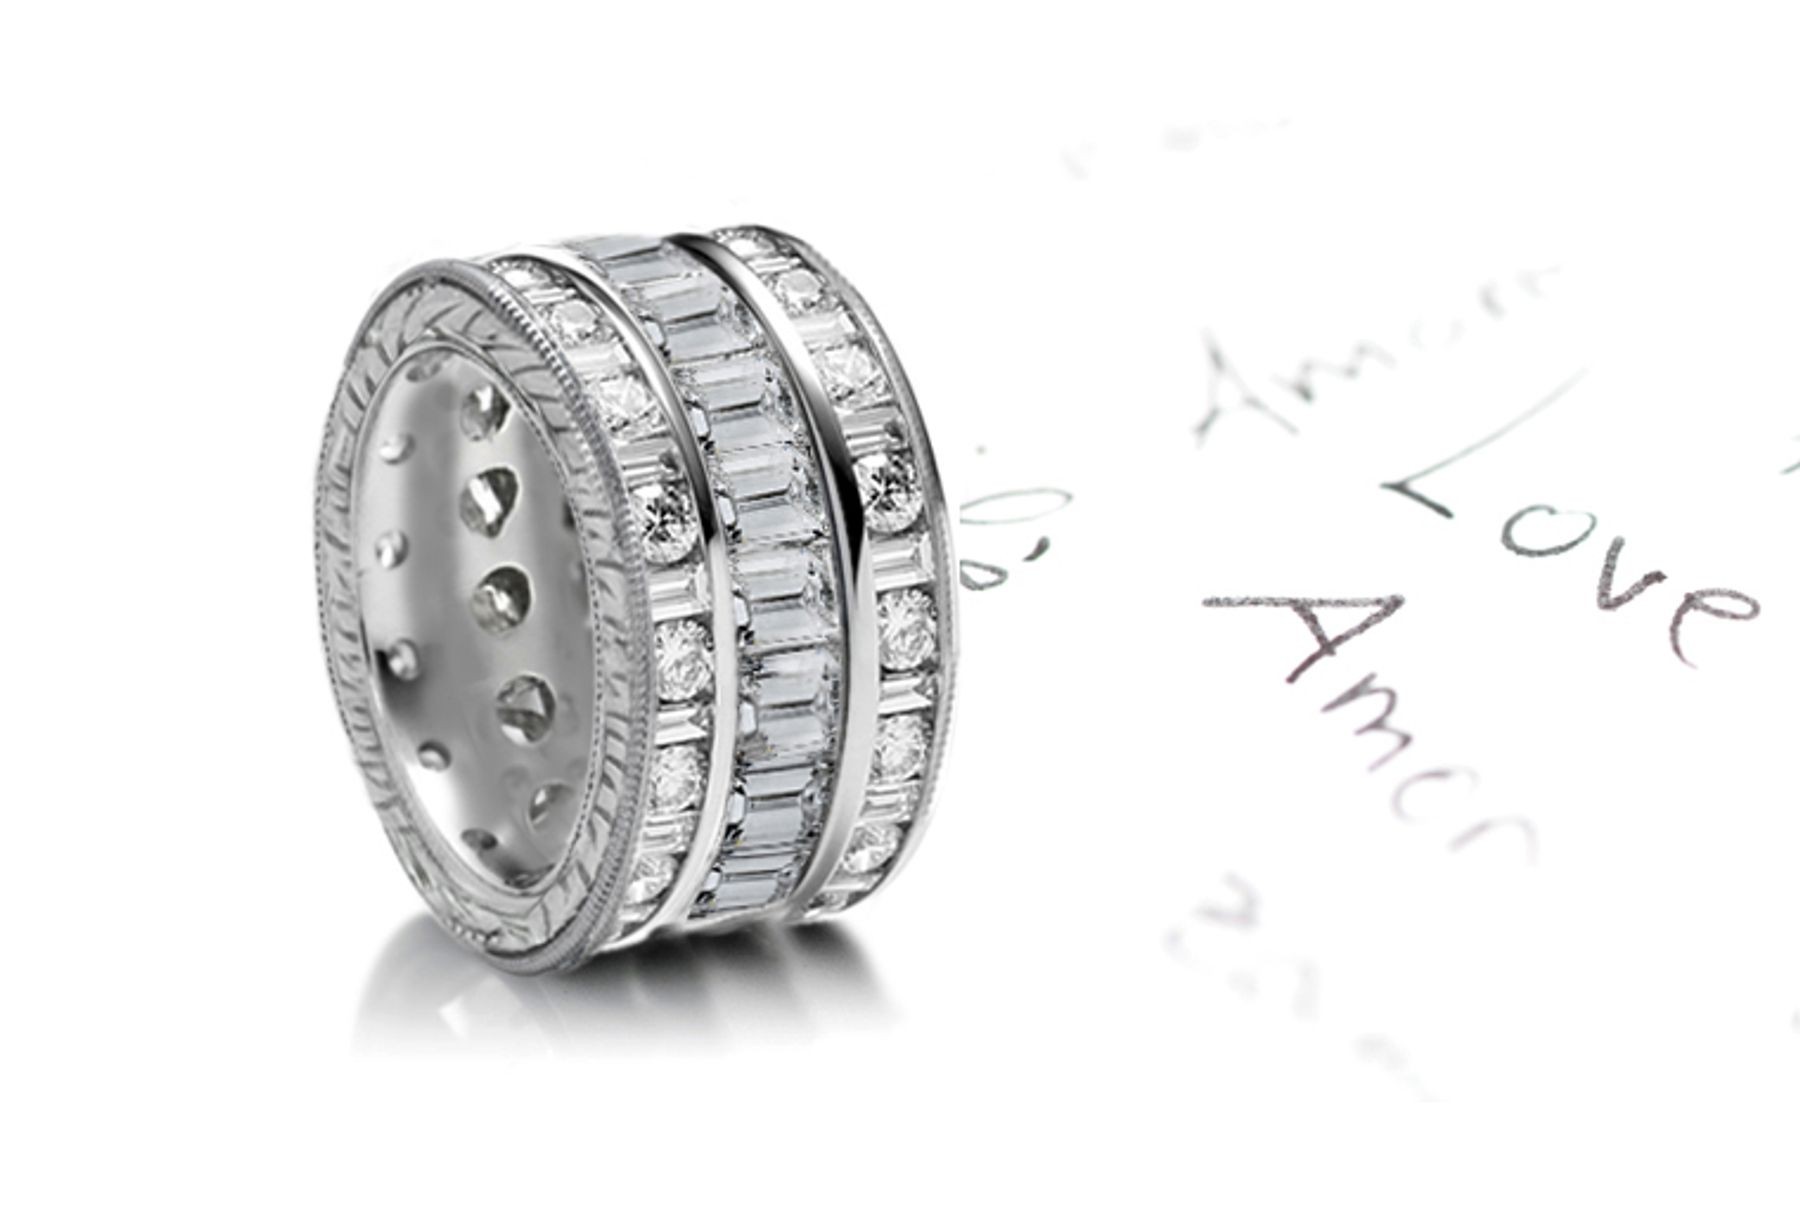 Custom Designed Sparkler of Baguette Diamonds set end-to-end bordered by row of mixed diamonds & Engraved Sides in Gold